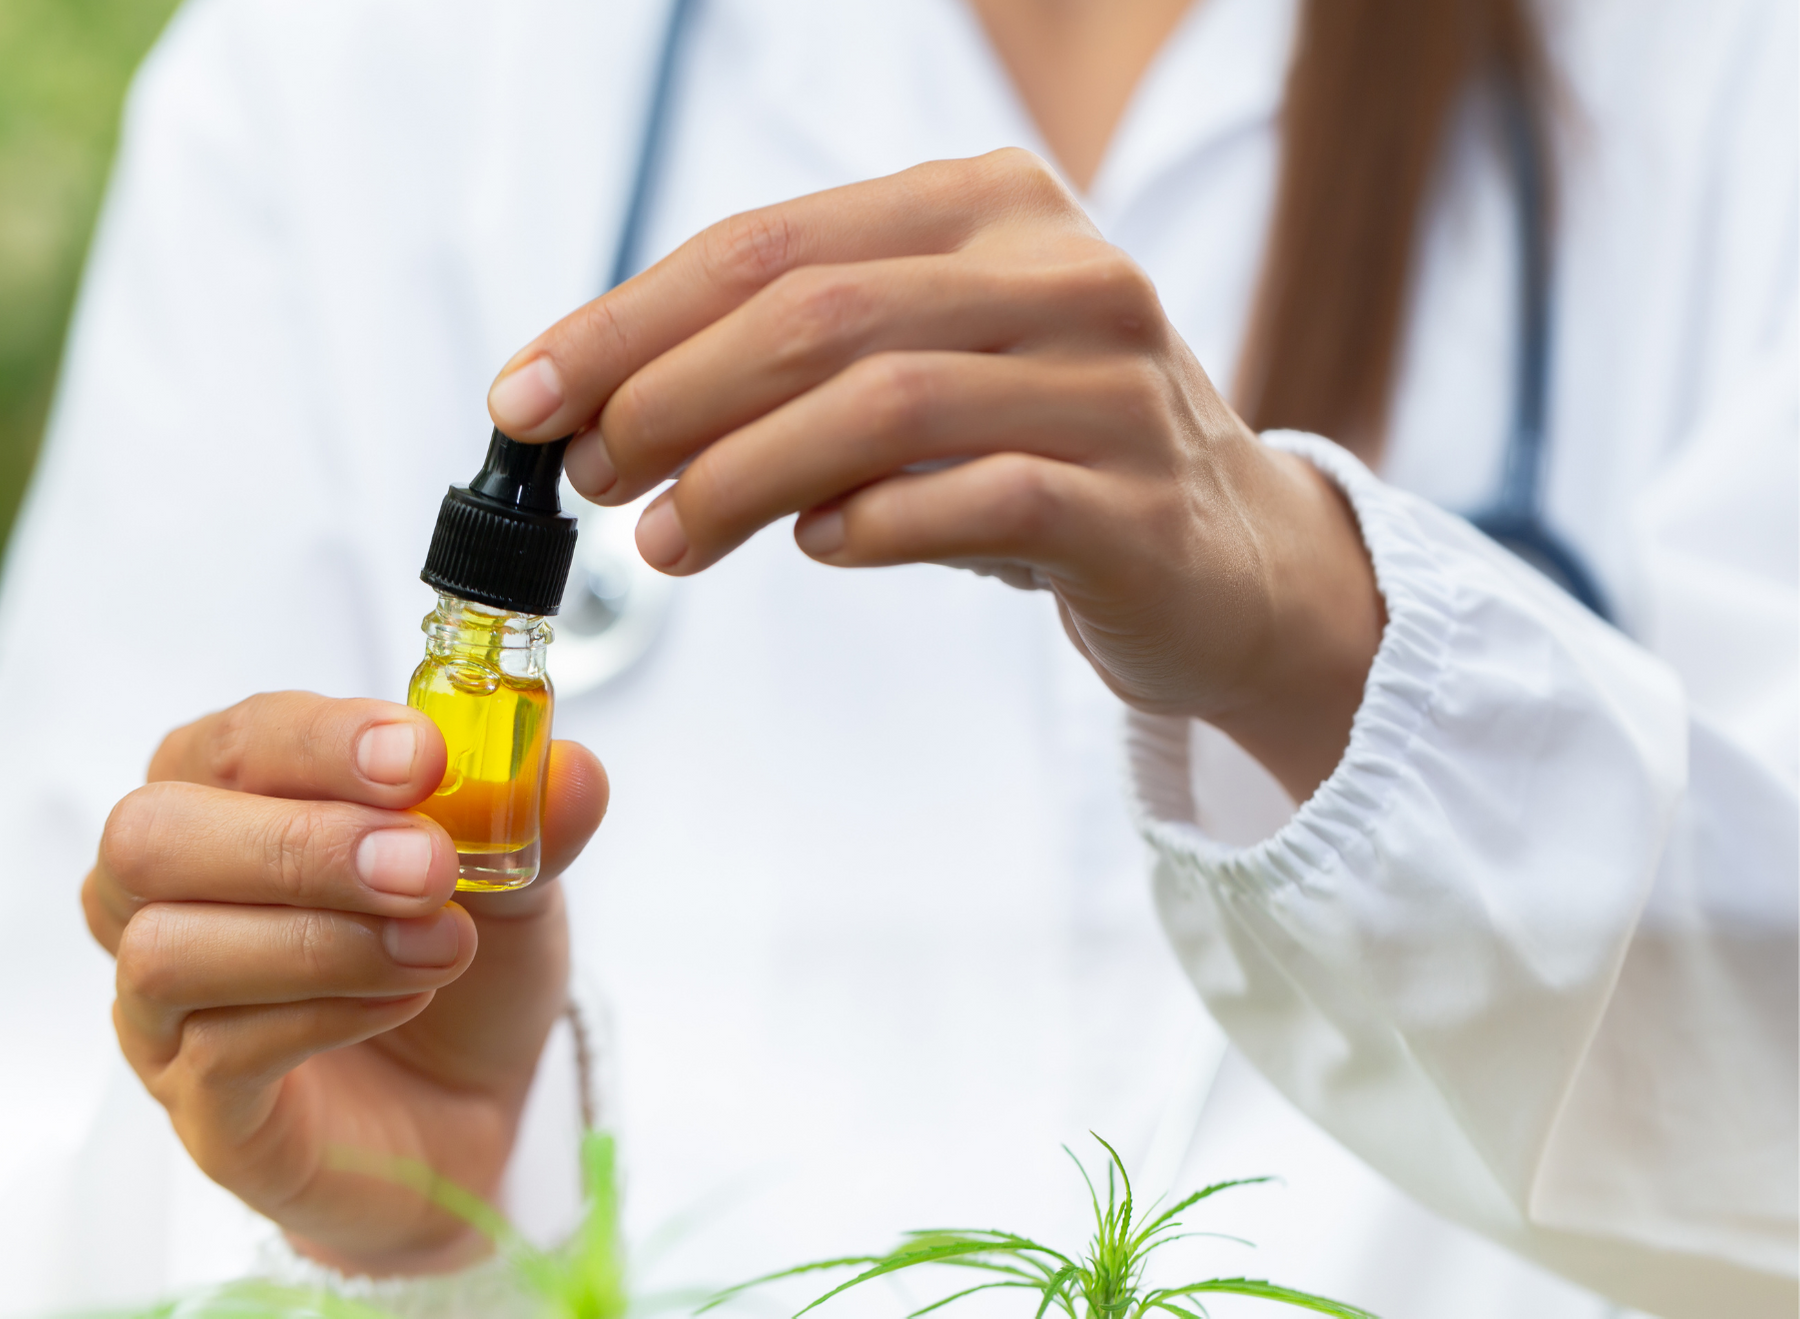 researcher holding CBD product